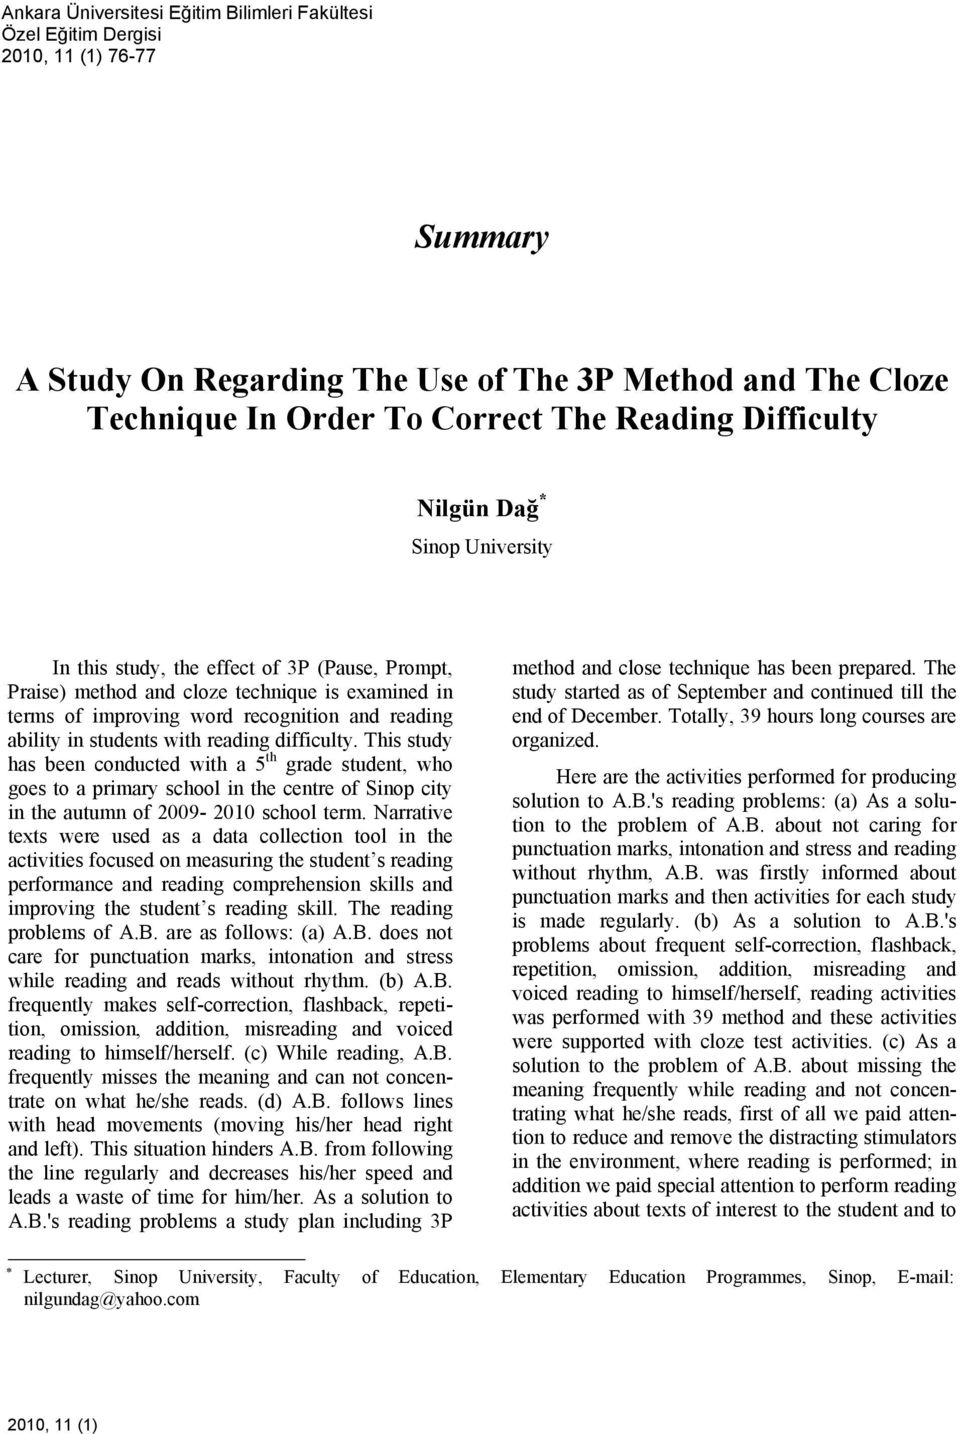 ability in students with reading difficulty. This study has been conducted with a 5 th grade student, who goes to a primary school in the centre of Sinop city in the autumn of 2009-2010 school term.